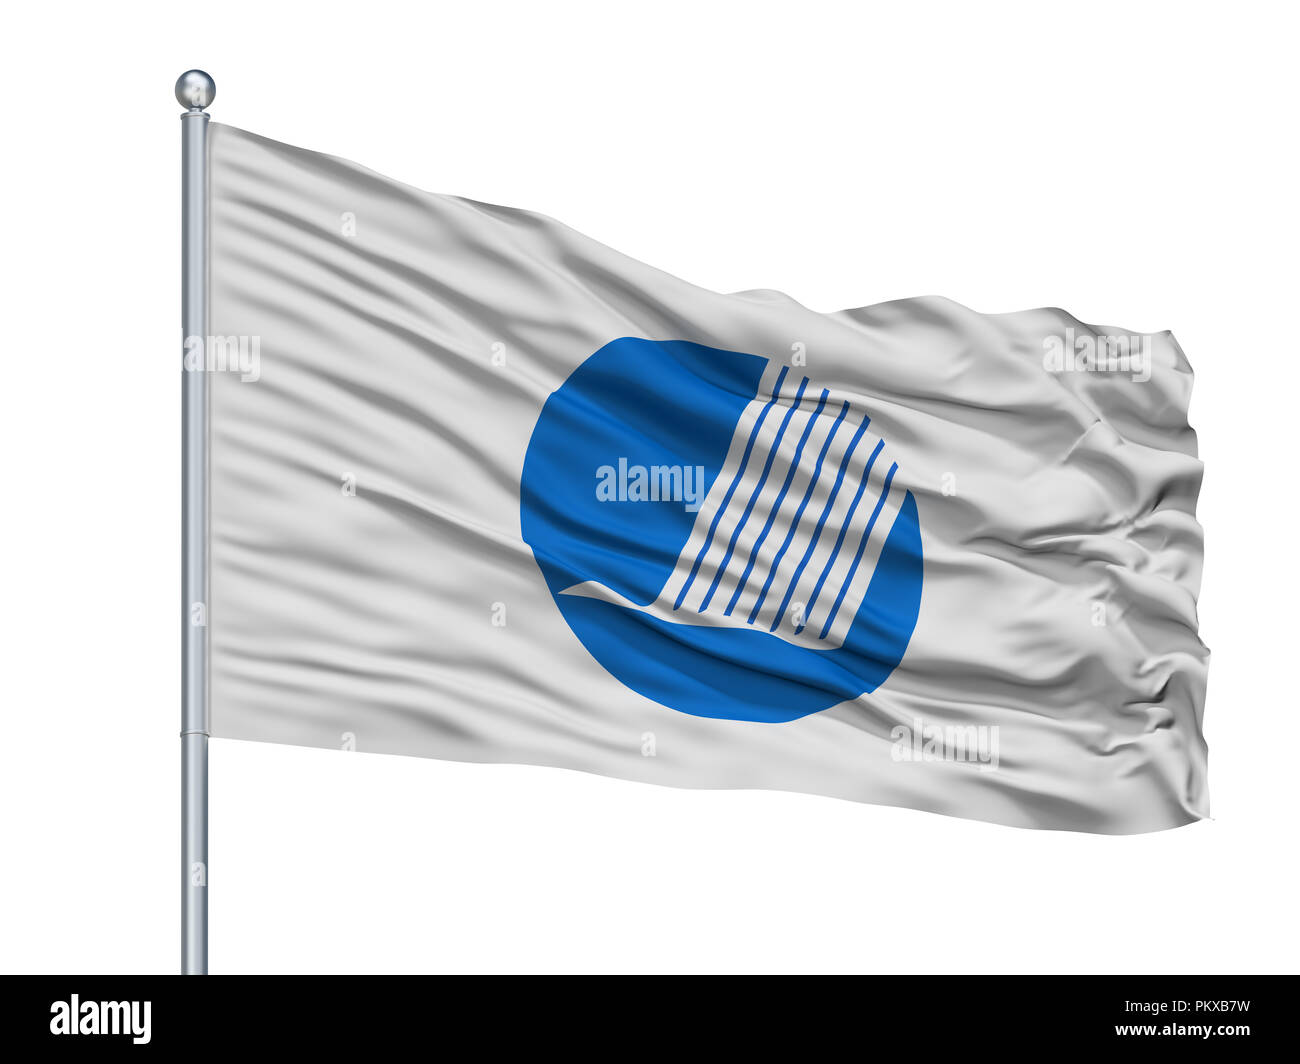 Nordic Council Flag On Flagpole, Isolated On White Background, 3D Rendering Stock Photo